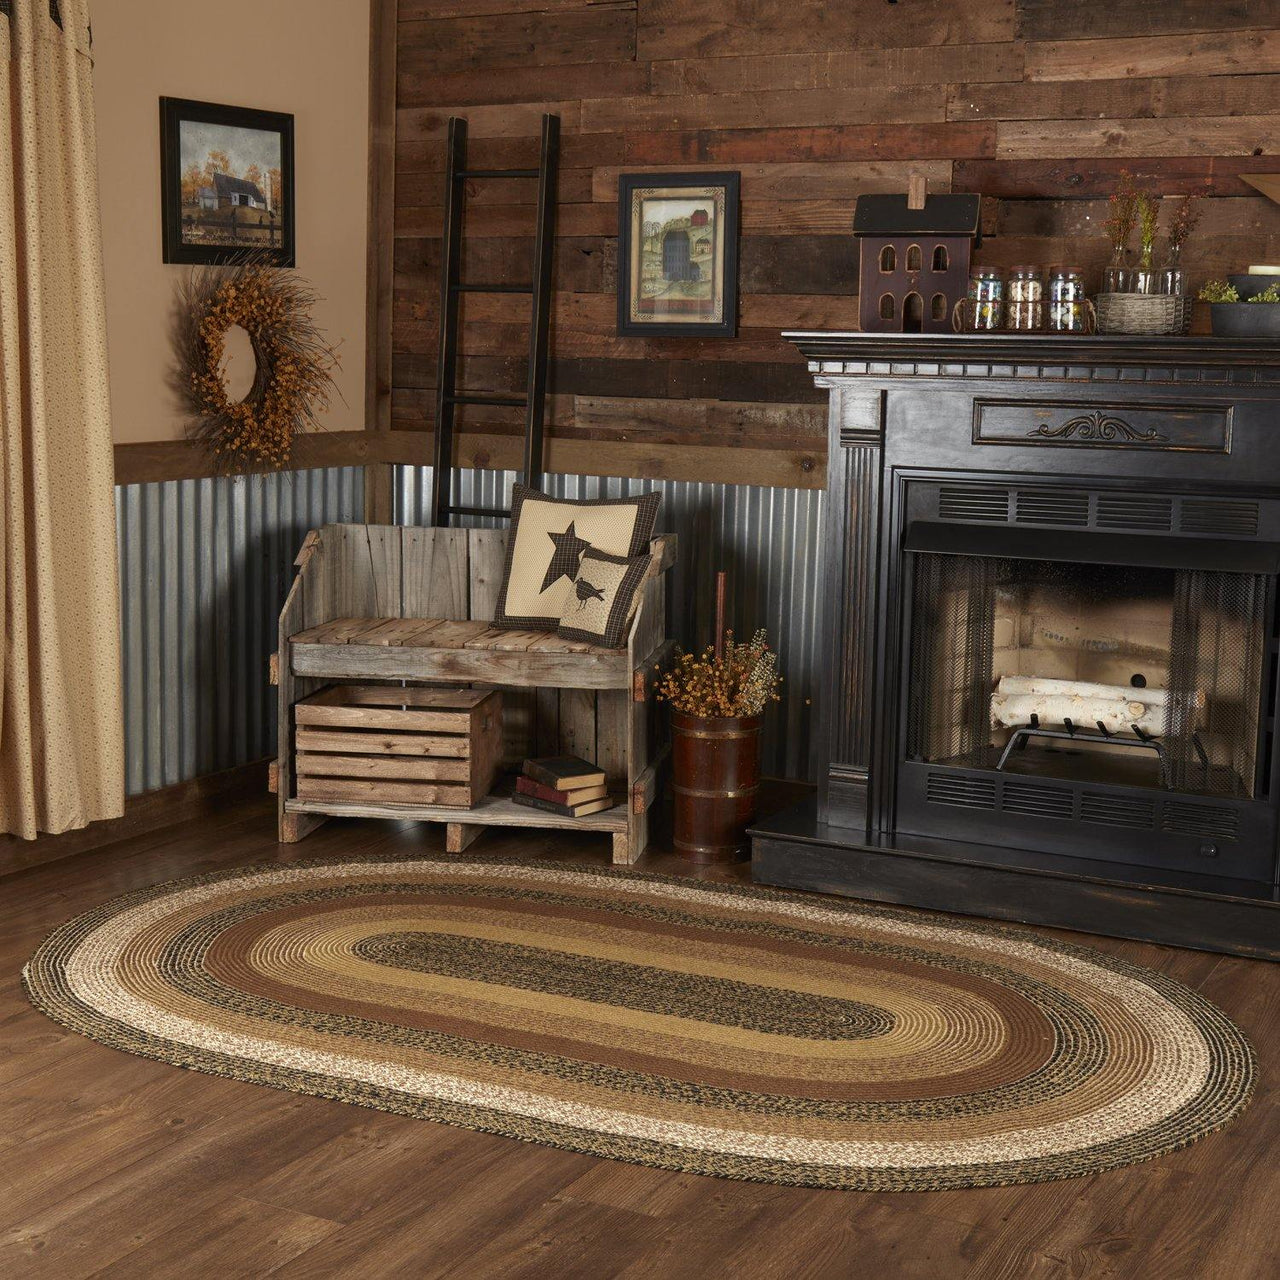 Kettle Grove Jute Braided Rug Oval 5'x8' with Rug Pad VHC Brands - The Fox Decor